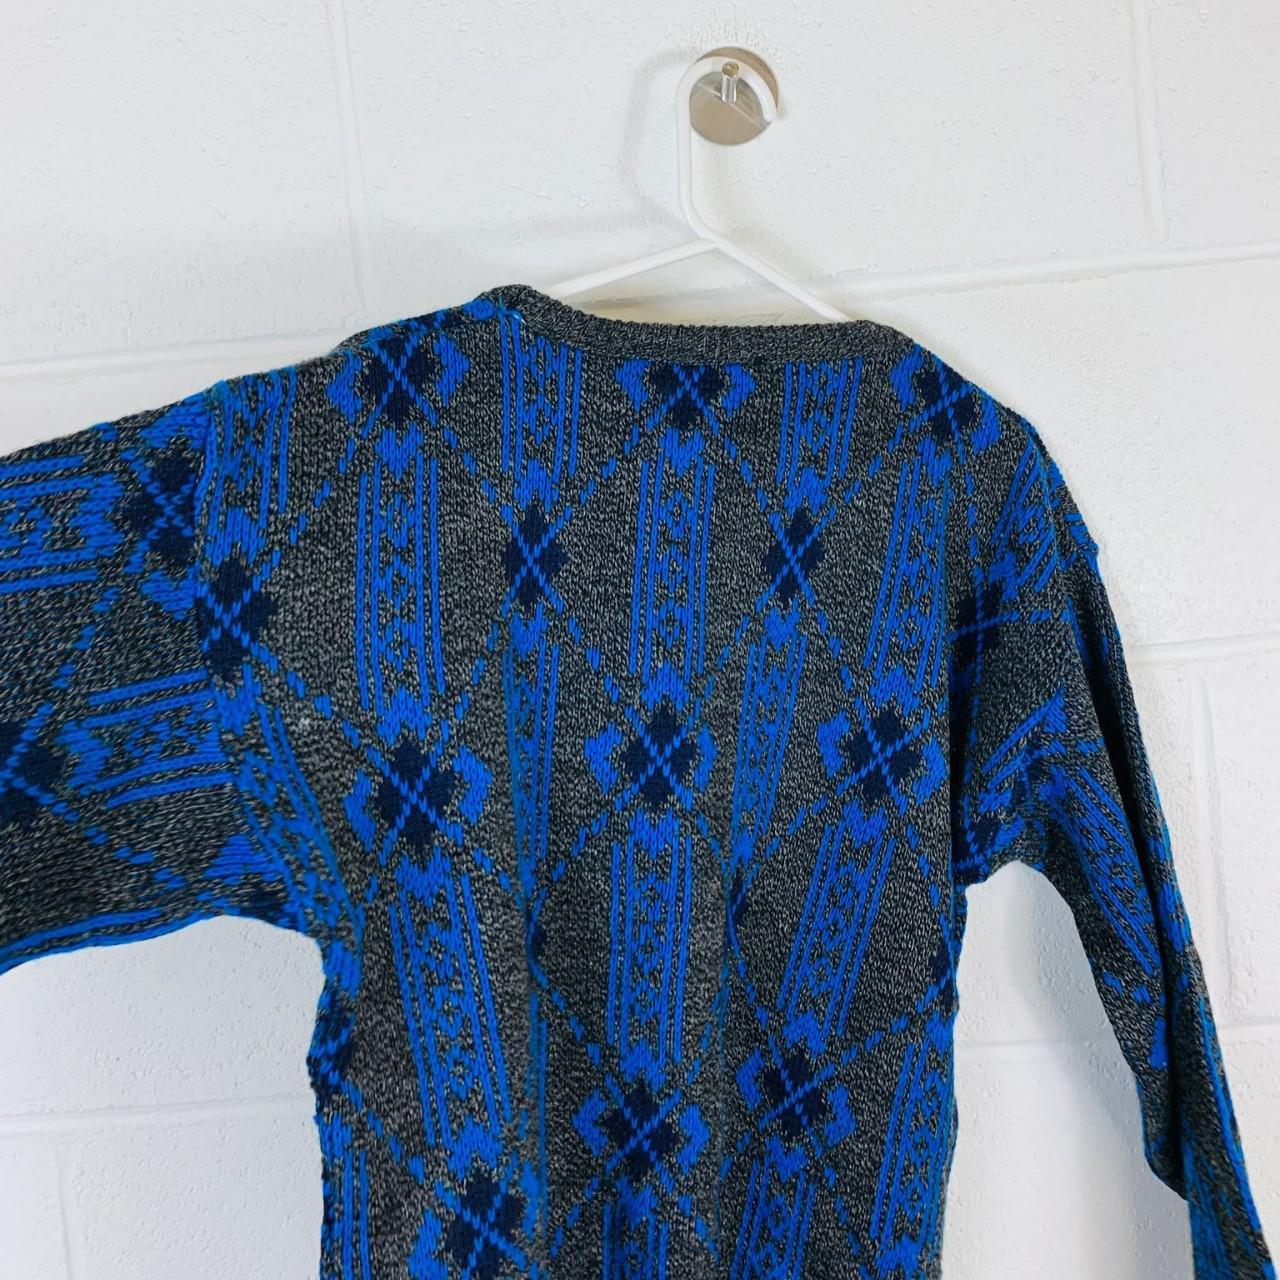 Product Image 4 - Vintage abstract knitted jumper

Blue and